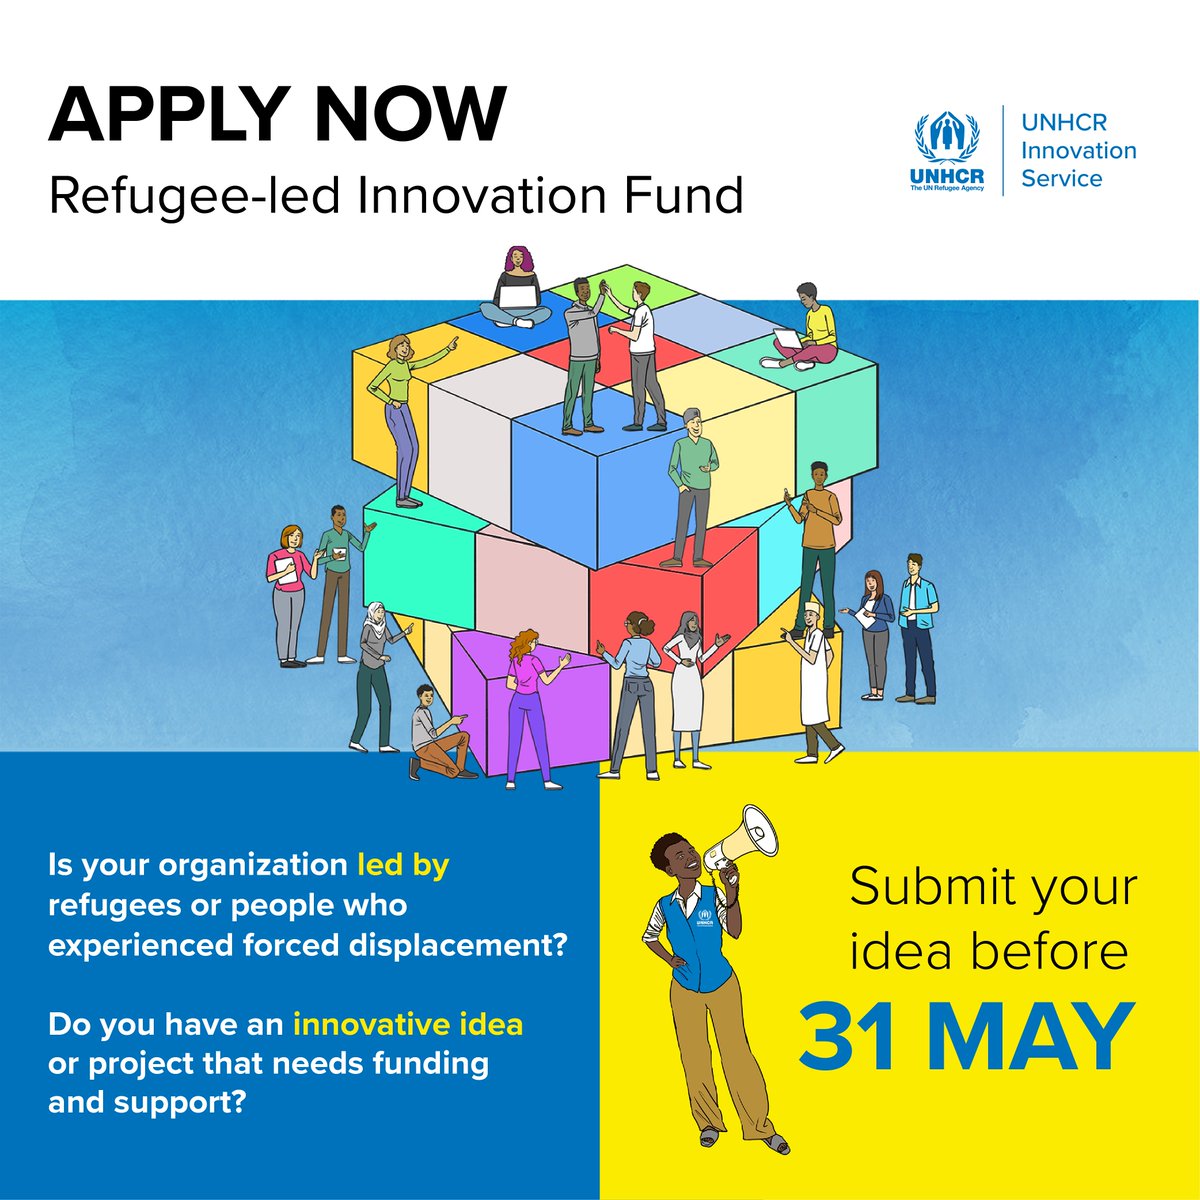 Calling all refugee-led organizations! We want to hear your forward-thinking ideas to bring lasting positive change. ✨ Apply now to UNHCR’s Refugee-led Innovation Fund: bit.ly/3QkHRey